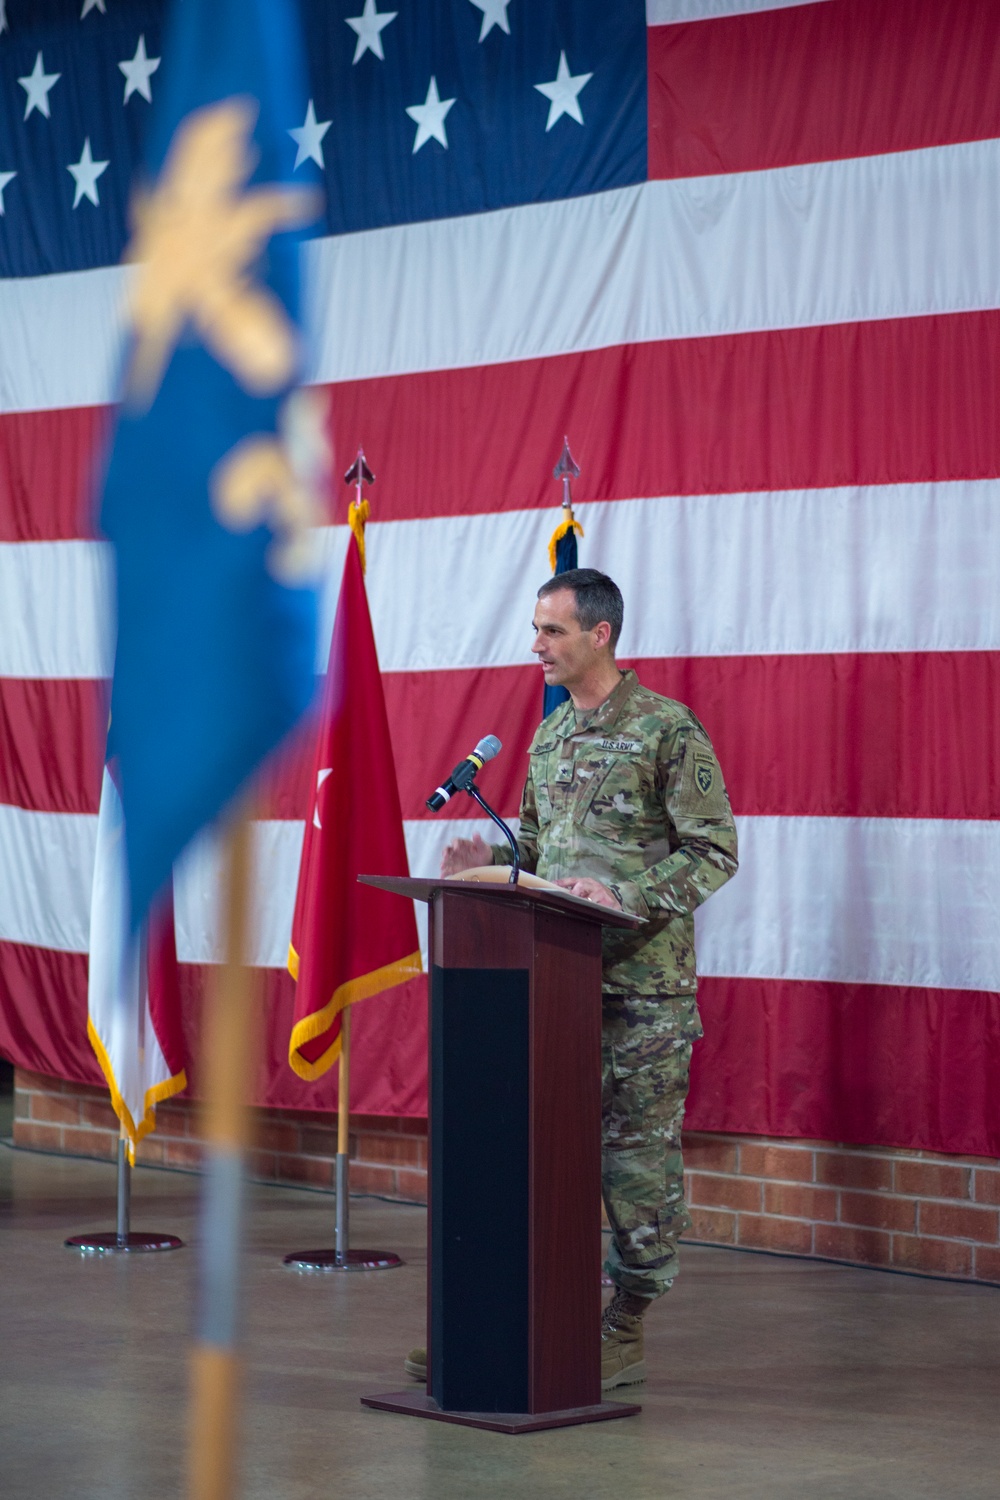 382nd PAD mobilizes for Operation Atlantic Resolve